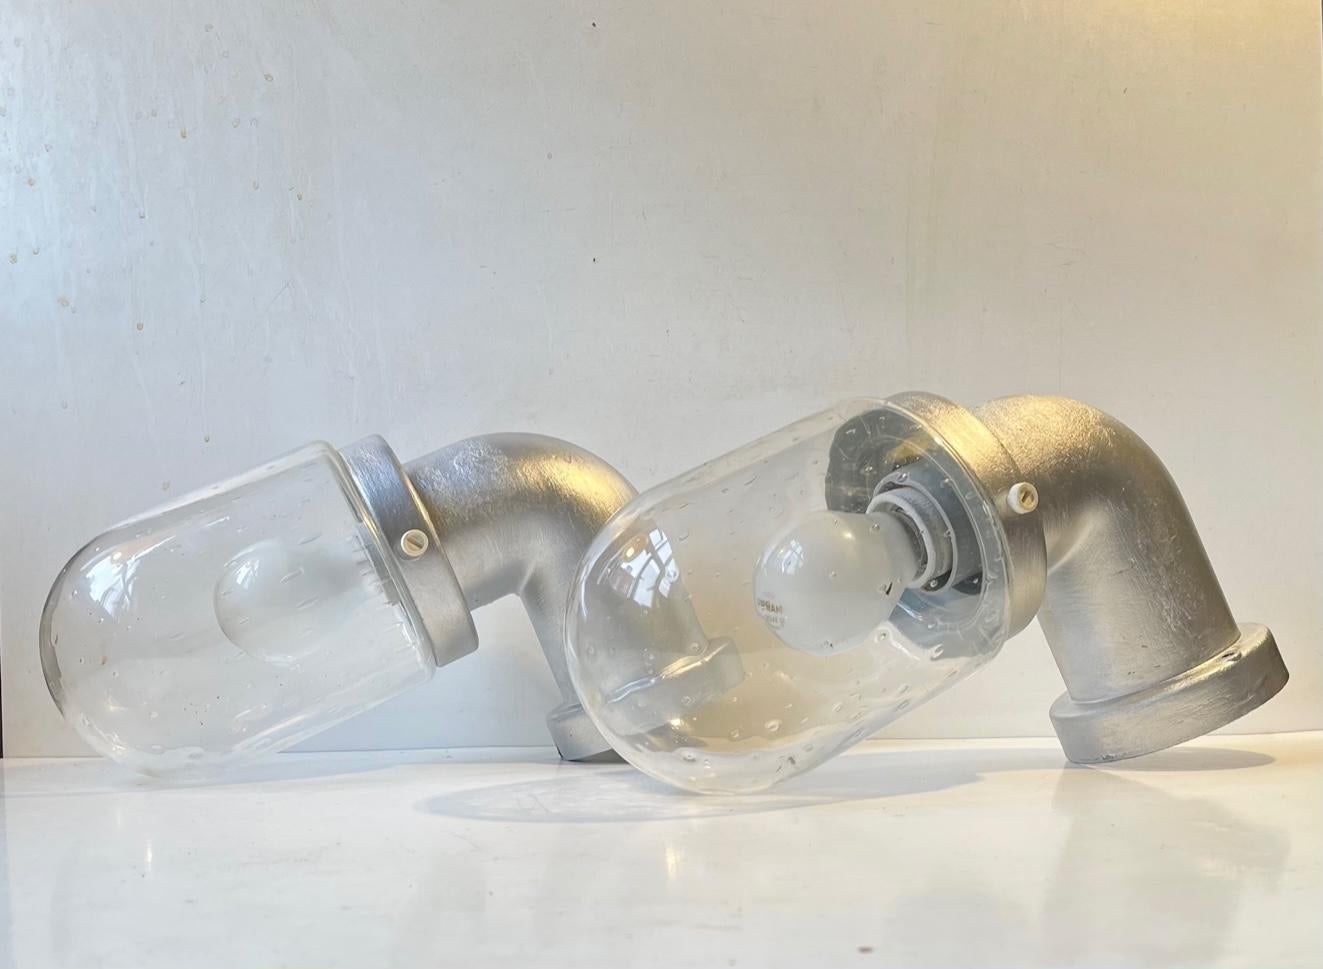 Matching pair of outdoor wall lights made from lacquered plastic and. clear glass with controlled air bubbles. Their pipe shape gives them a distinct industrial look. The set features original porcelain sockets with a capacity up to 100 watts E27.